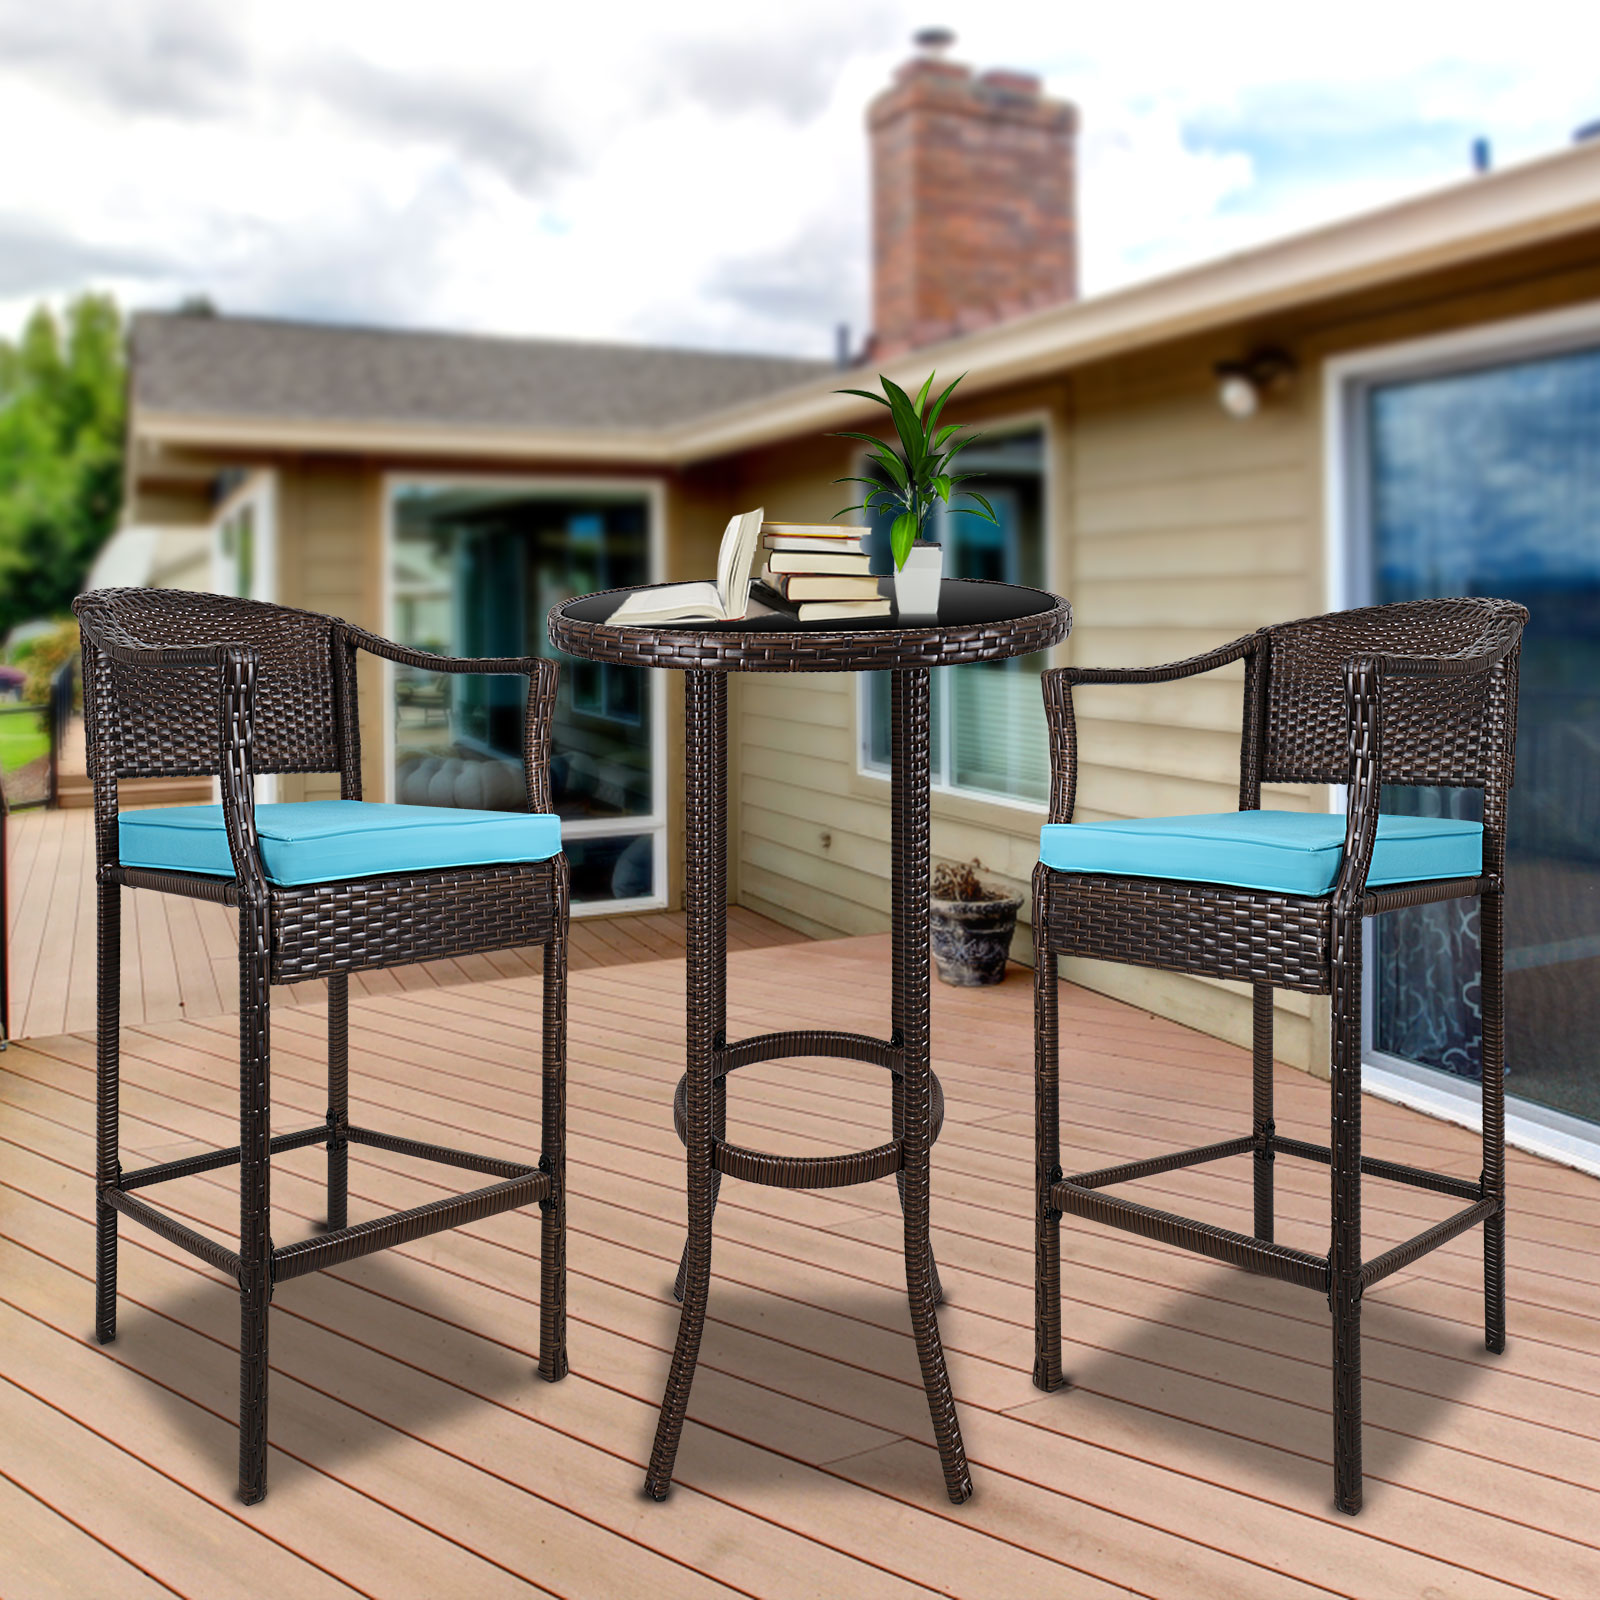 Syngar Patio Bistro Set, 3 Piece Outdoor Bar Table and Stools Set, 2 Patio Cushioned Bar Chairs with 1 High Glass Top Table, All Weather PE Rattan Furniture Set for Garden Yard Balcony Pool Cafe, B13 - image 1 of 10